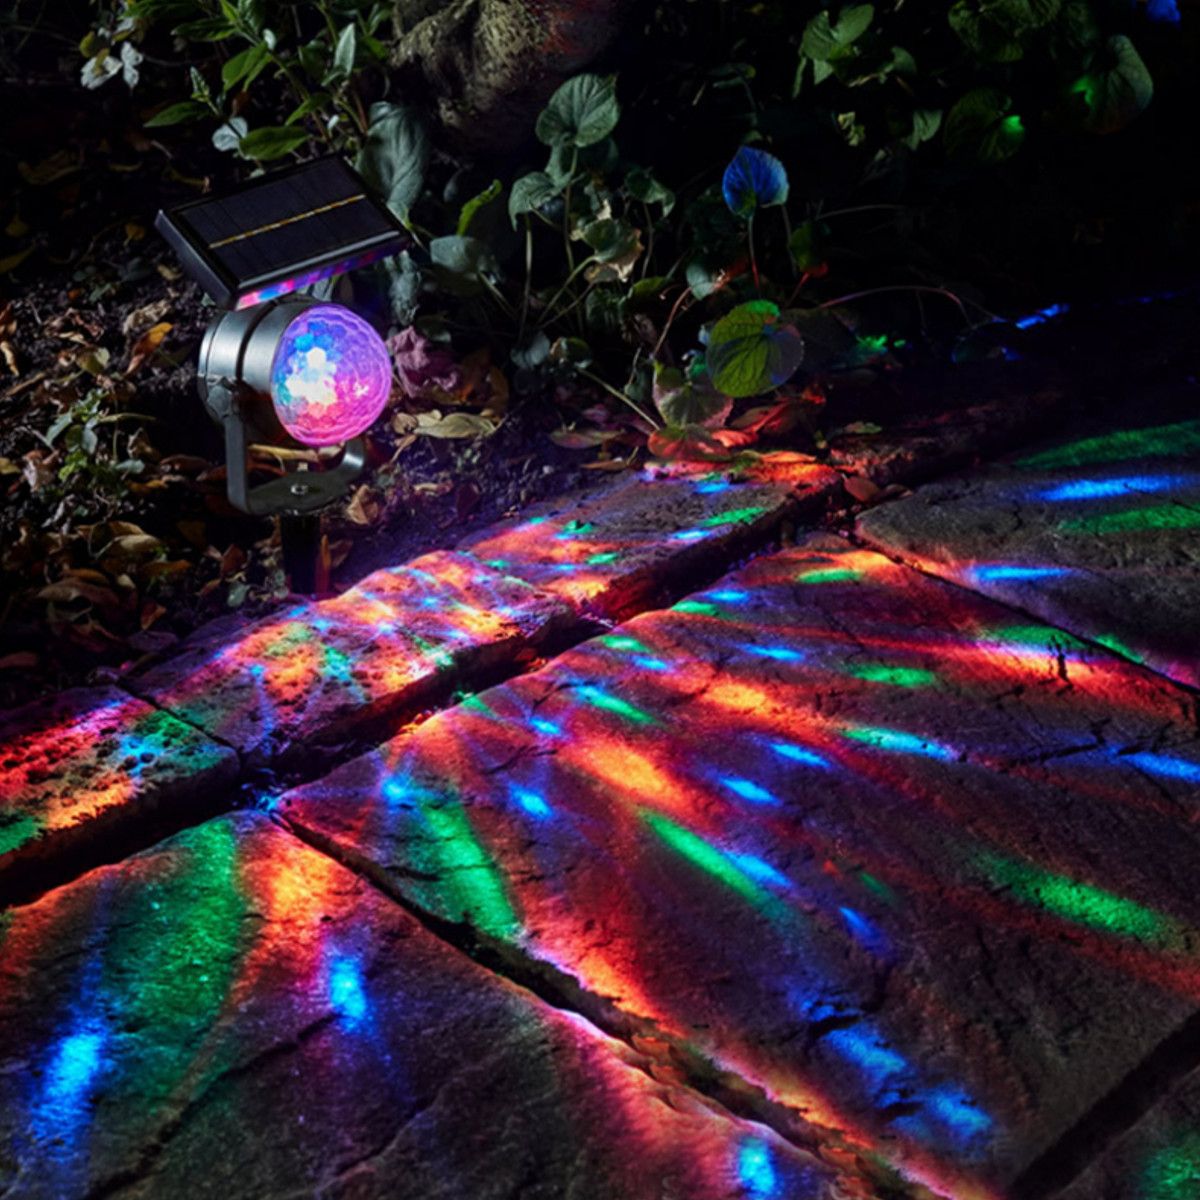 Solar-Powered-Rotating-LED-Projection-Light-Colorful-Garden-Lawn-Lamp-Waterproof-Outdoor-Lighting-1708558